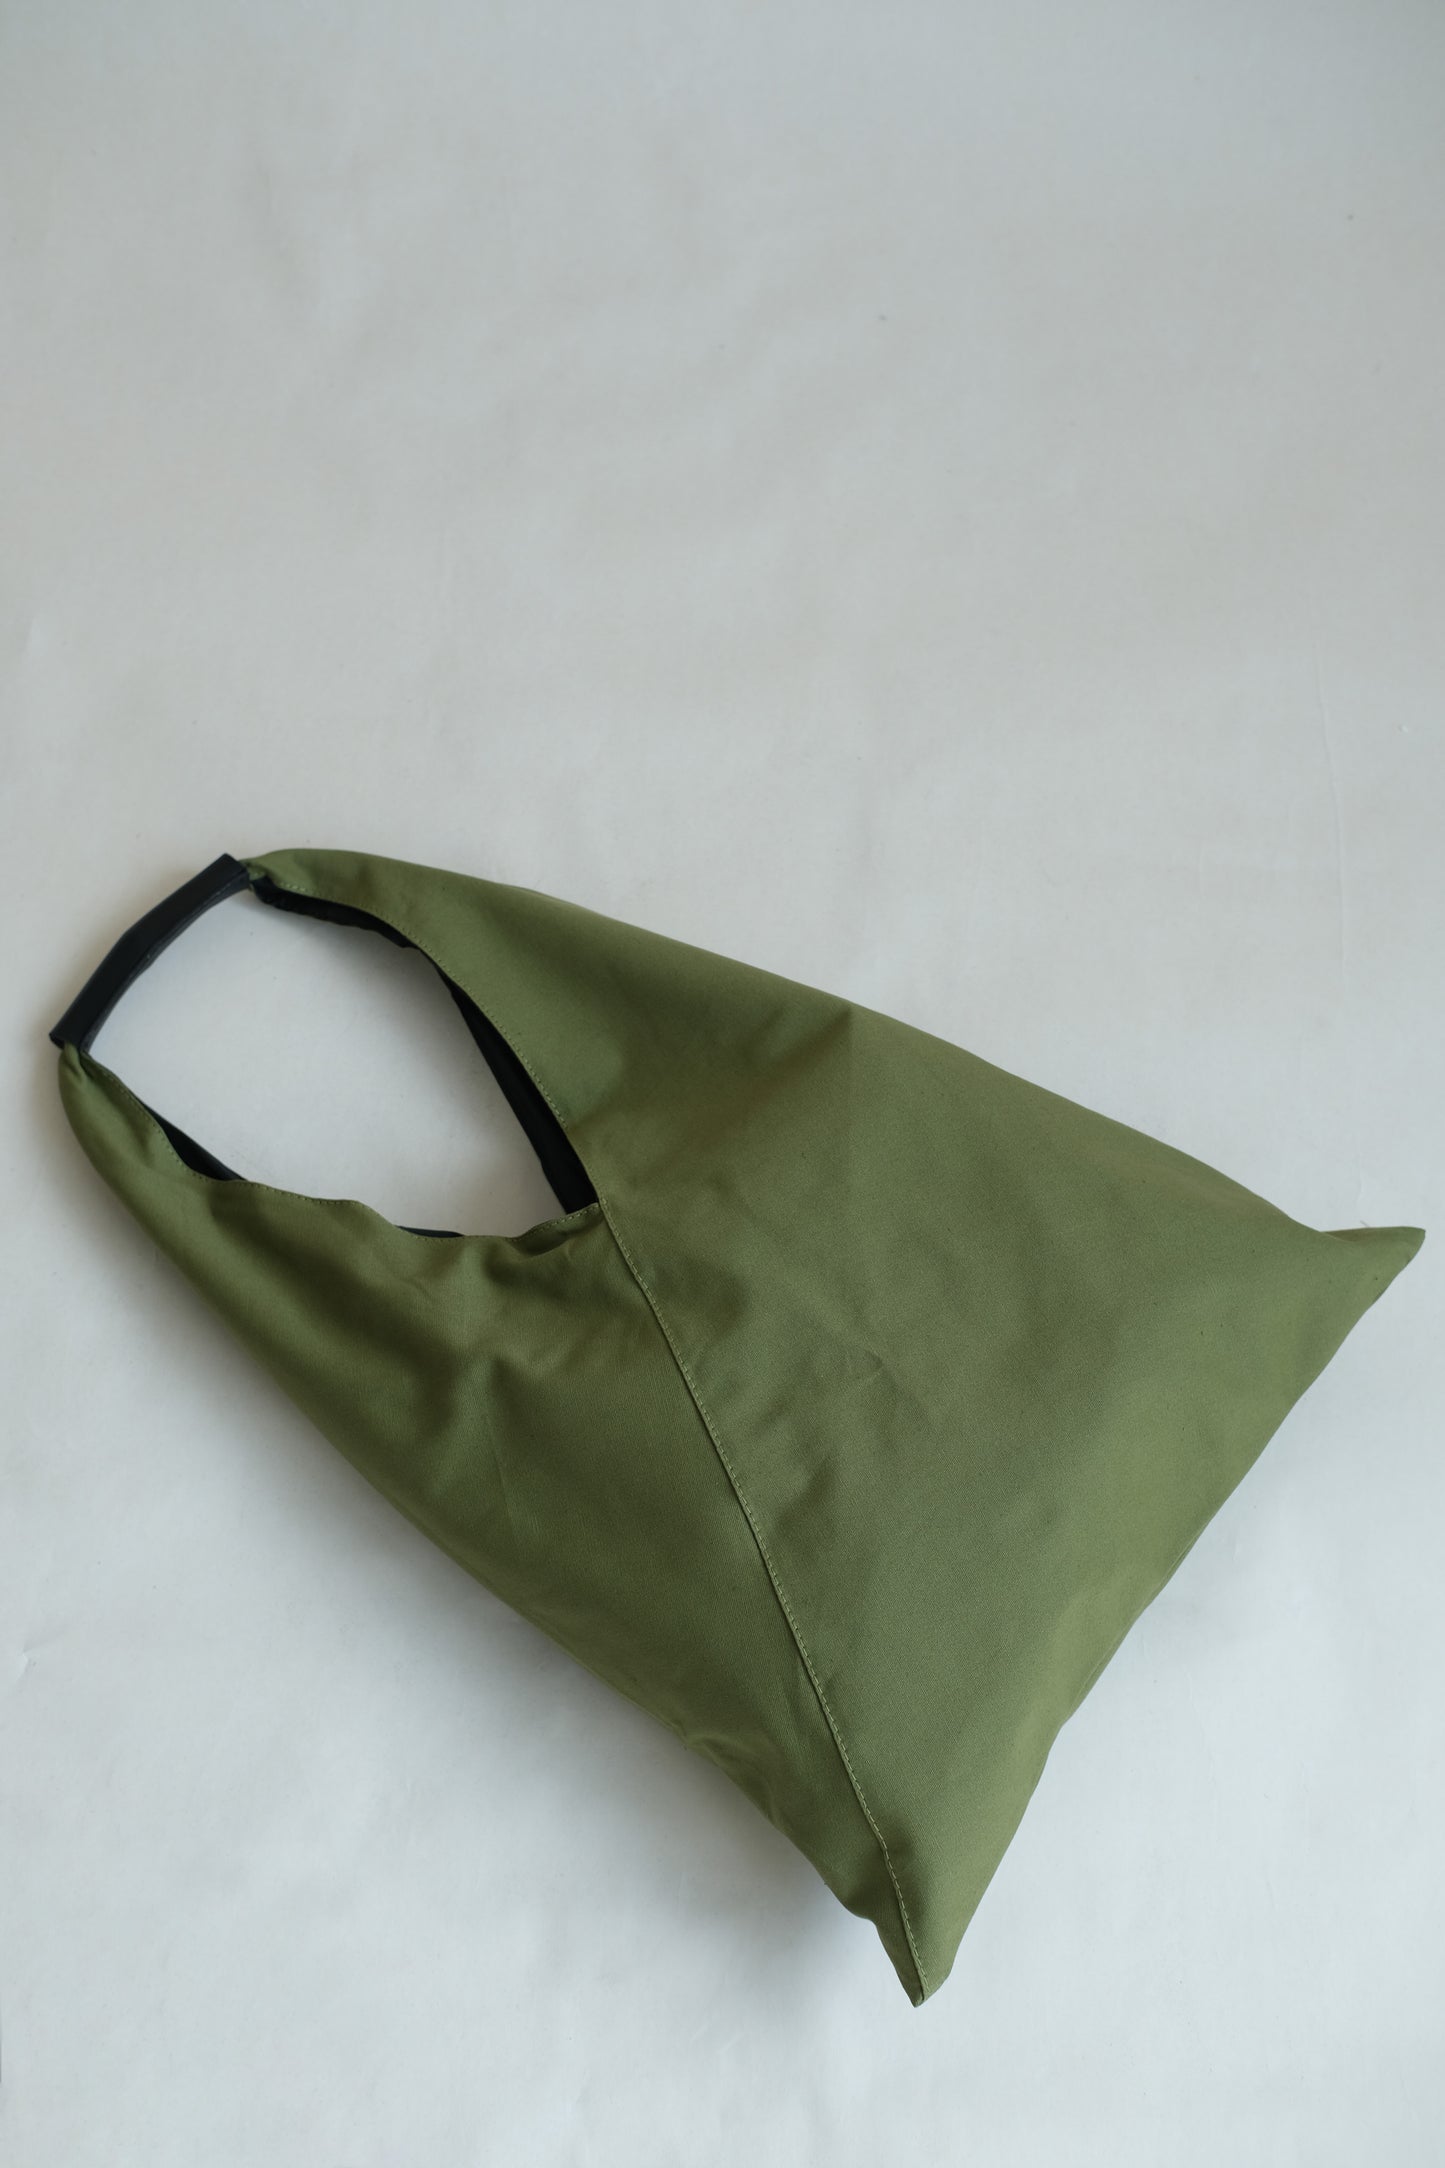 Panels of casual canvas bag in army green